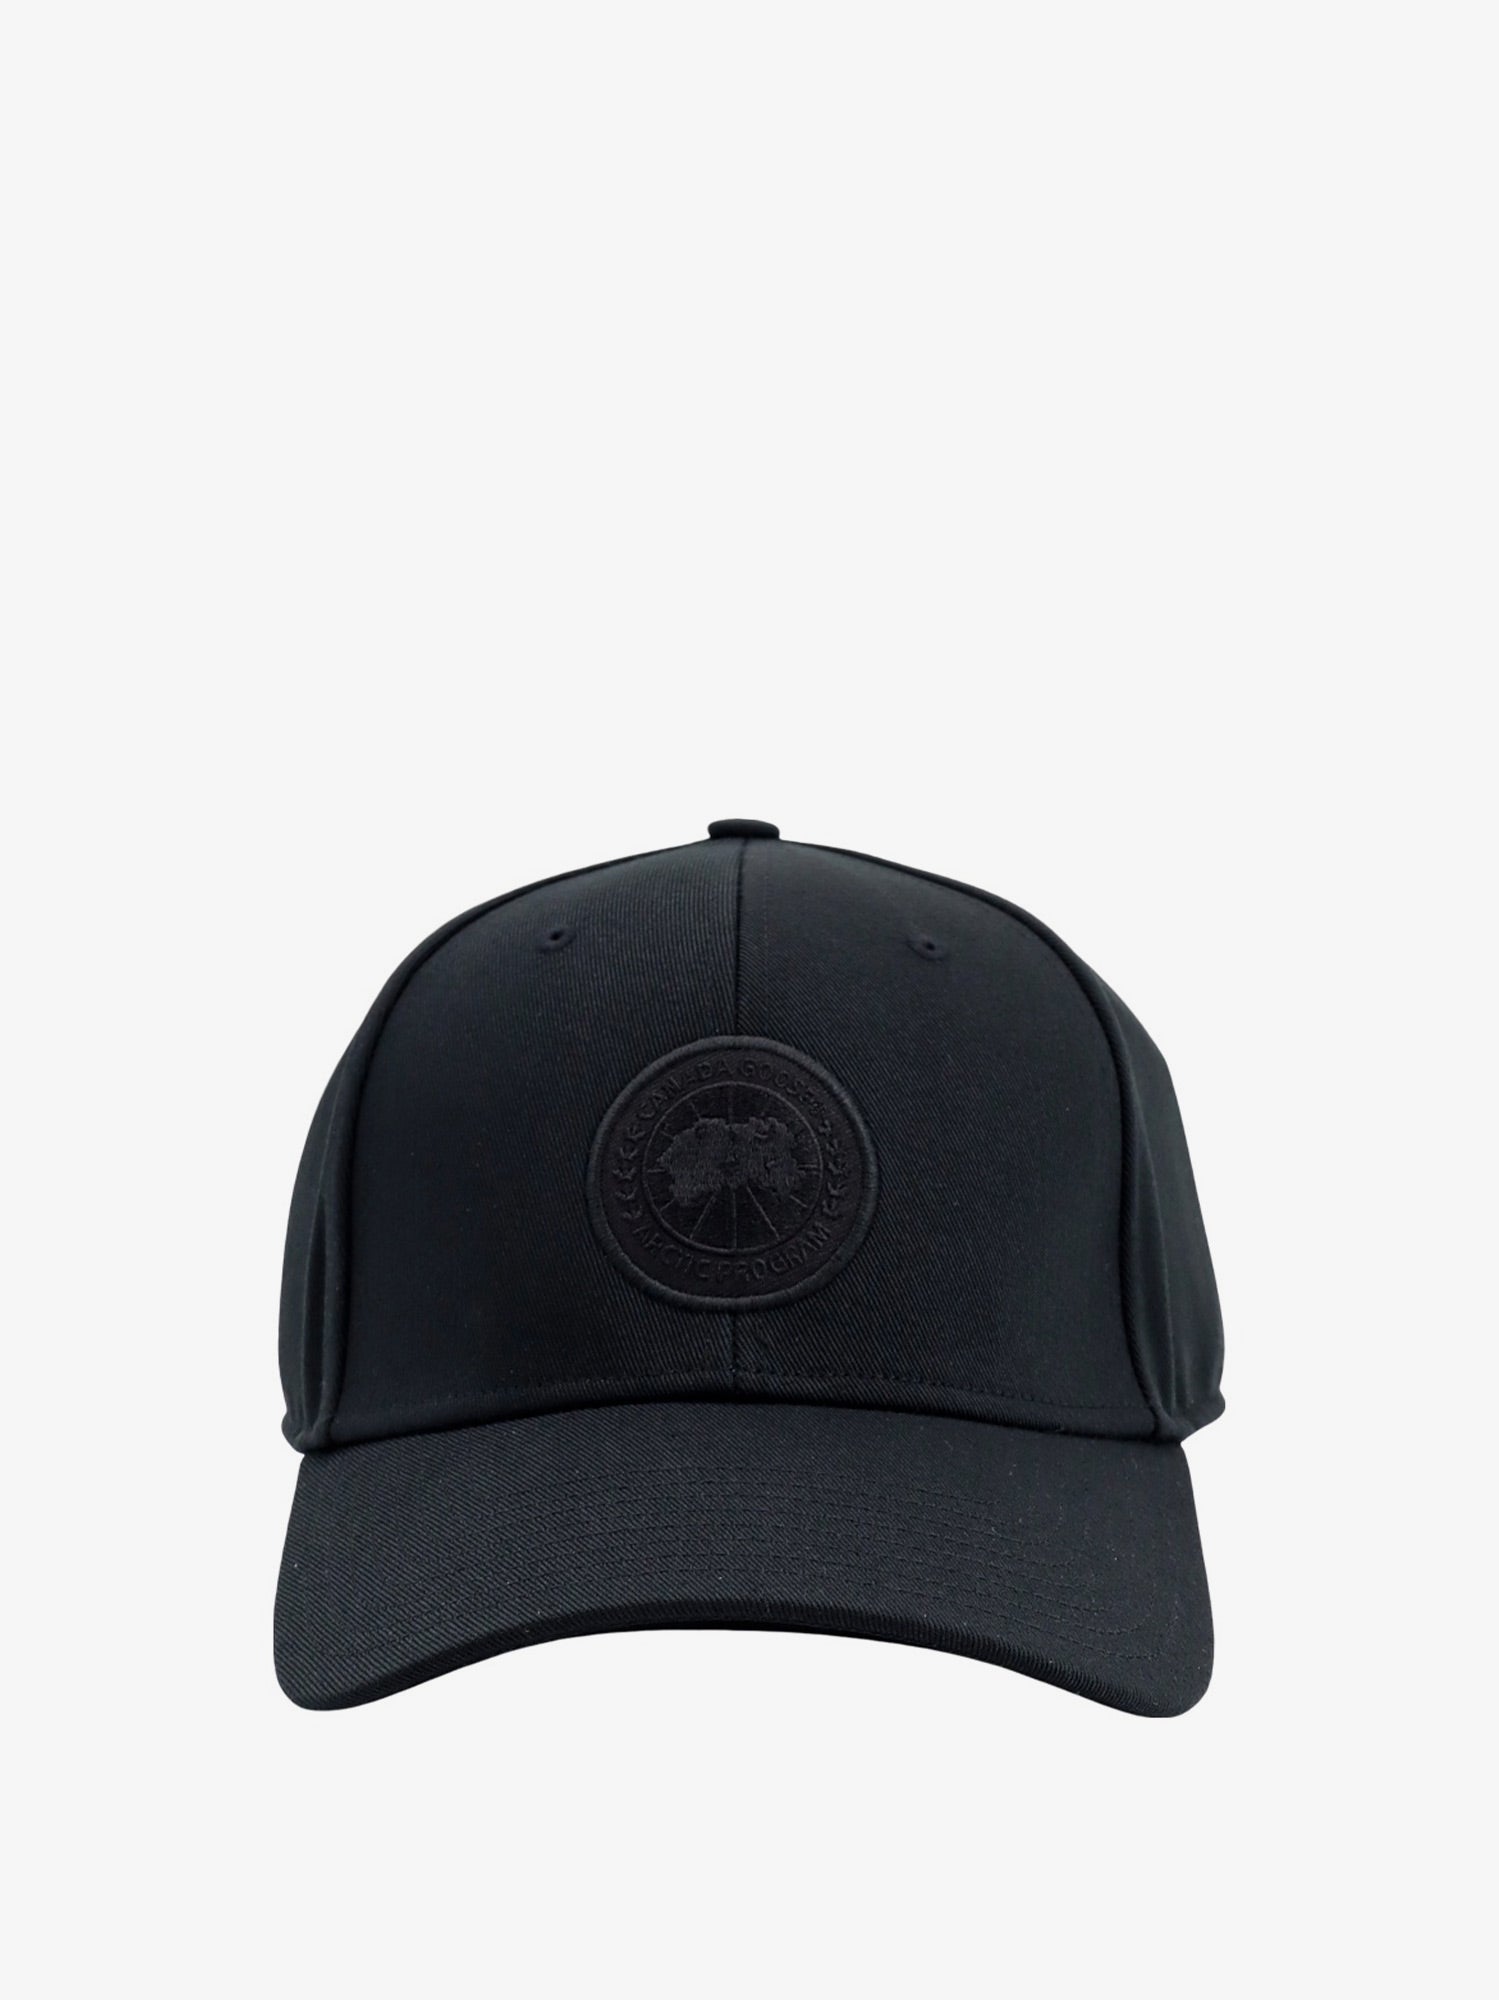 canada goose hat - an